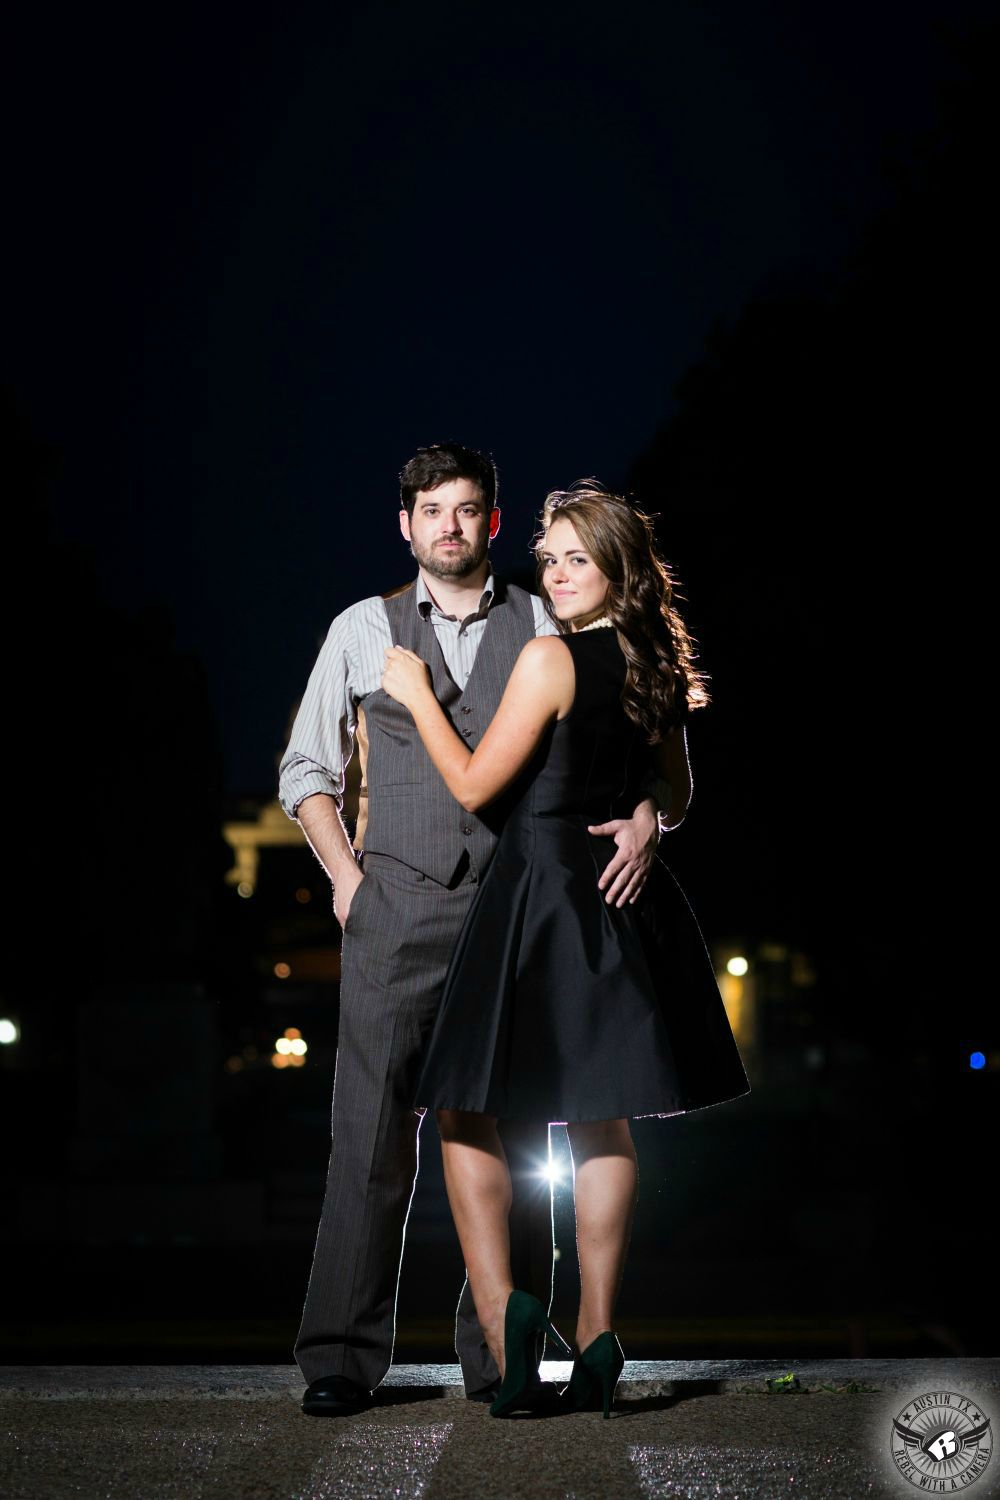 brown haired girl in black dress and black pumps smirks at camera while holding on to vest of brown haired guy wearing grey and white striped vest and pants at top of steps in darkness in this engagement photo at UT austin